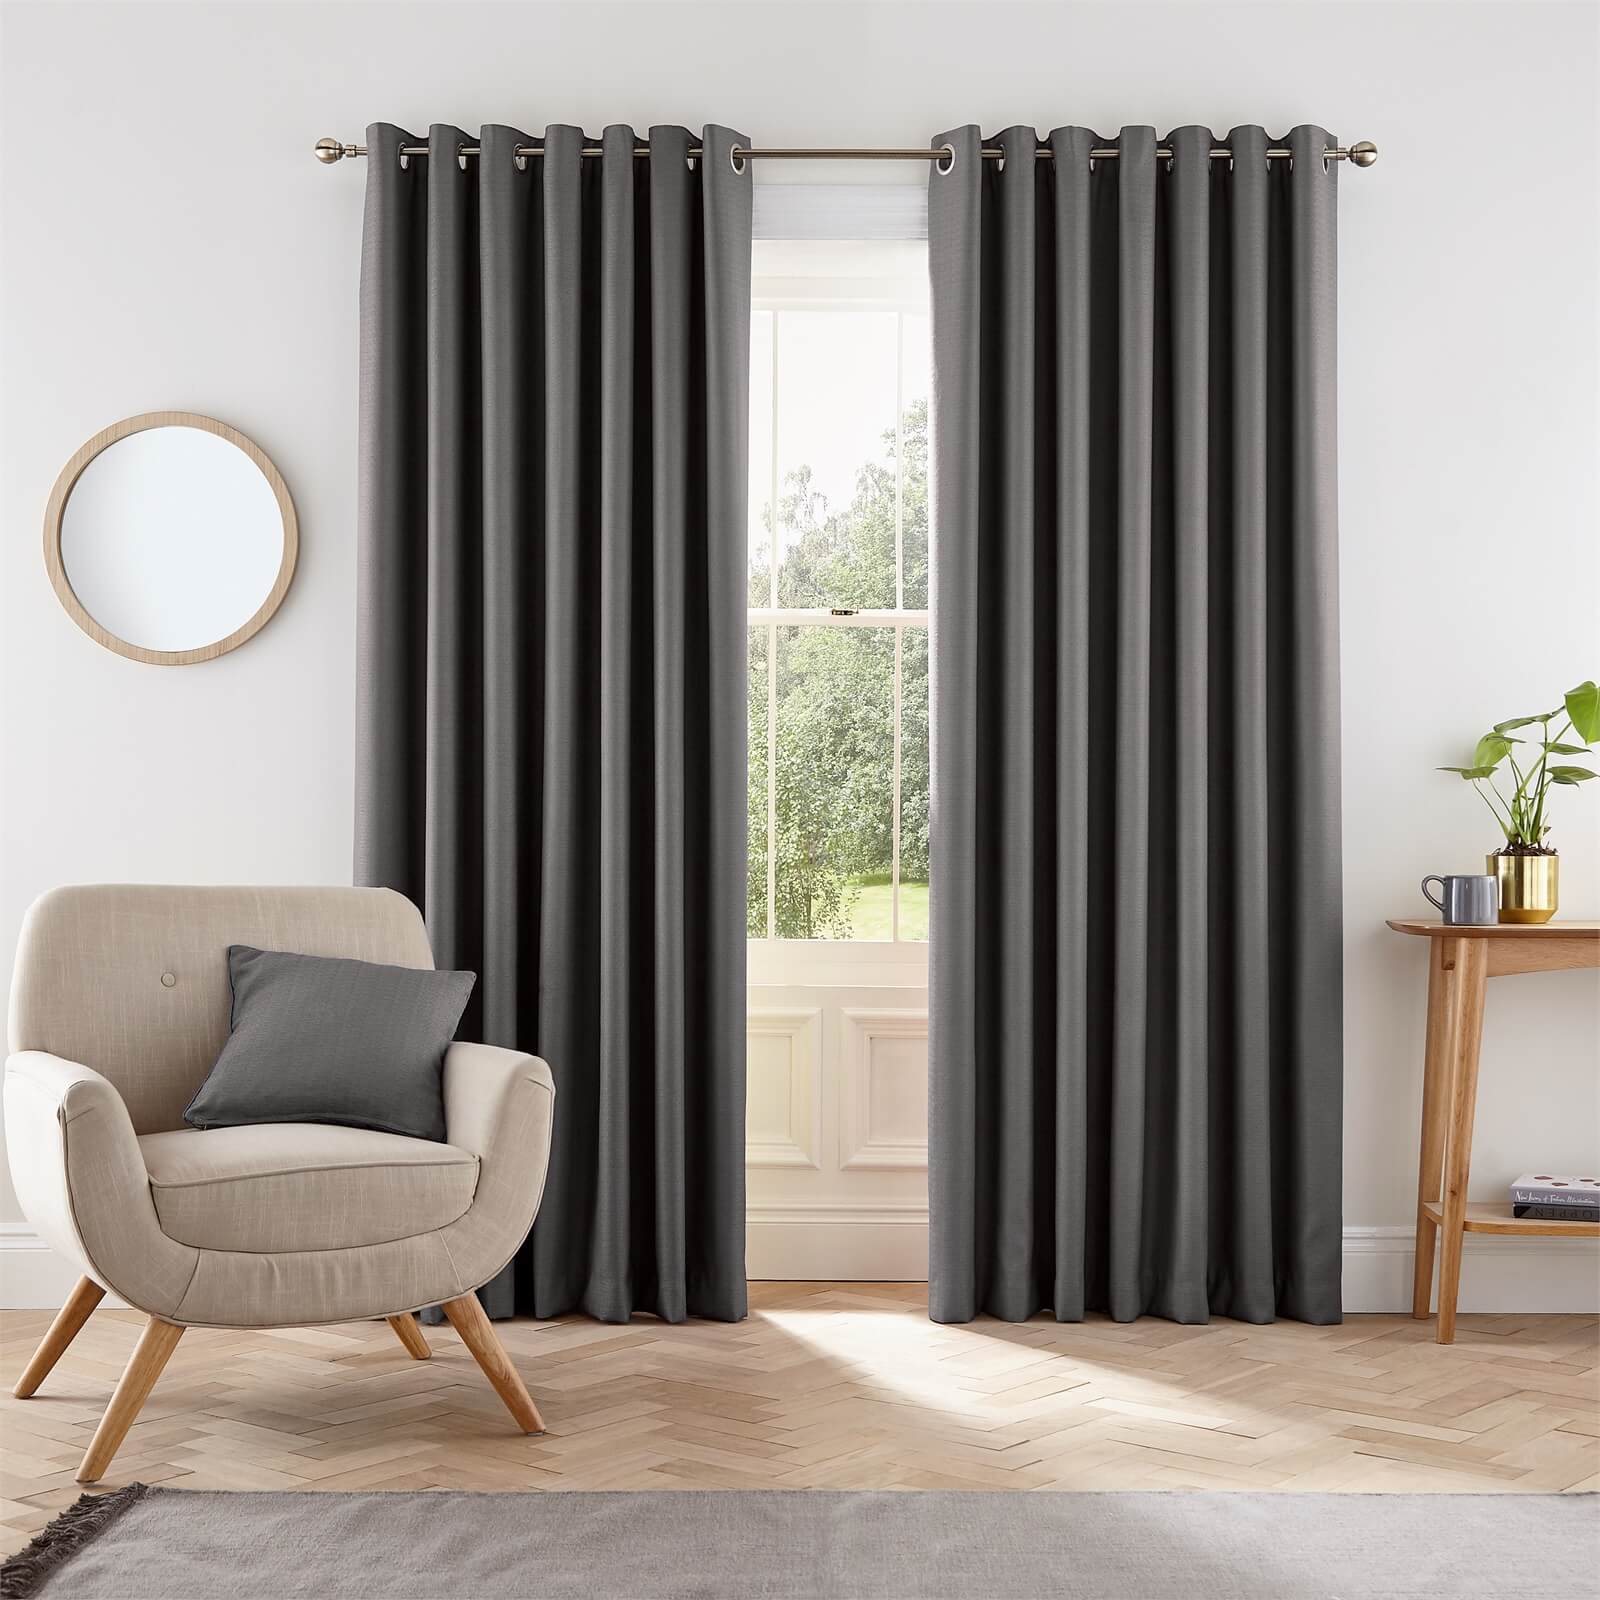 Helena Springfield Eden Lined Curtains 66 x 90 - Charcoal